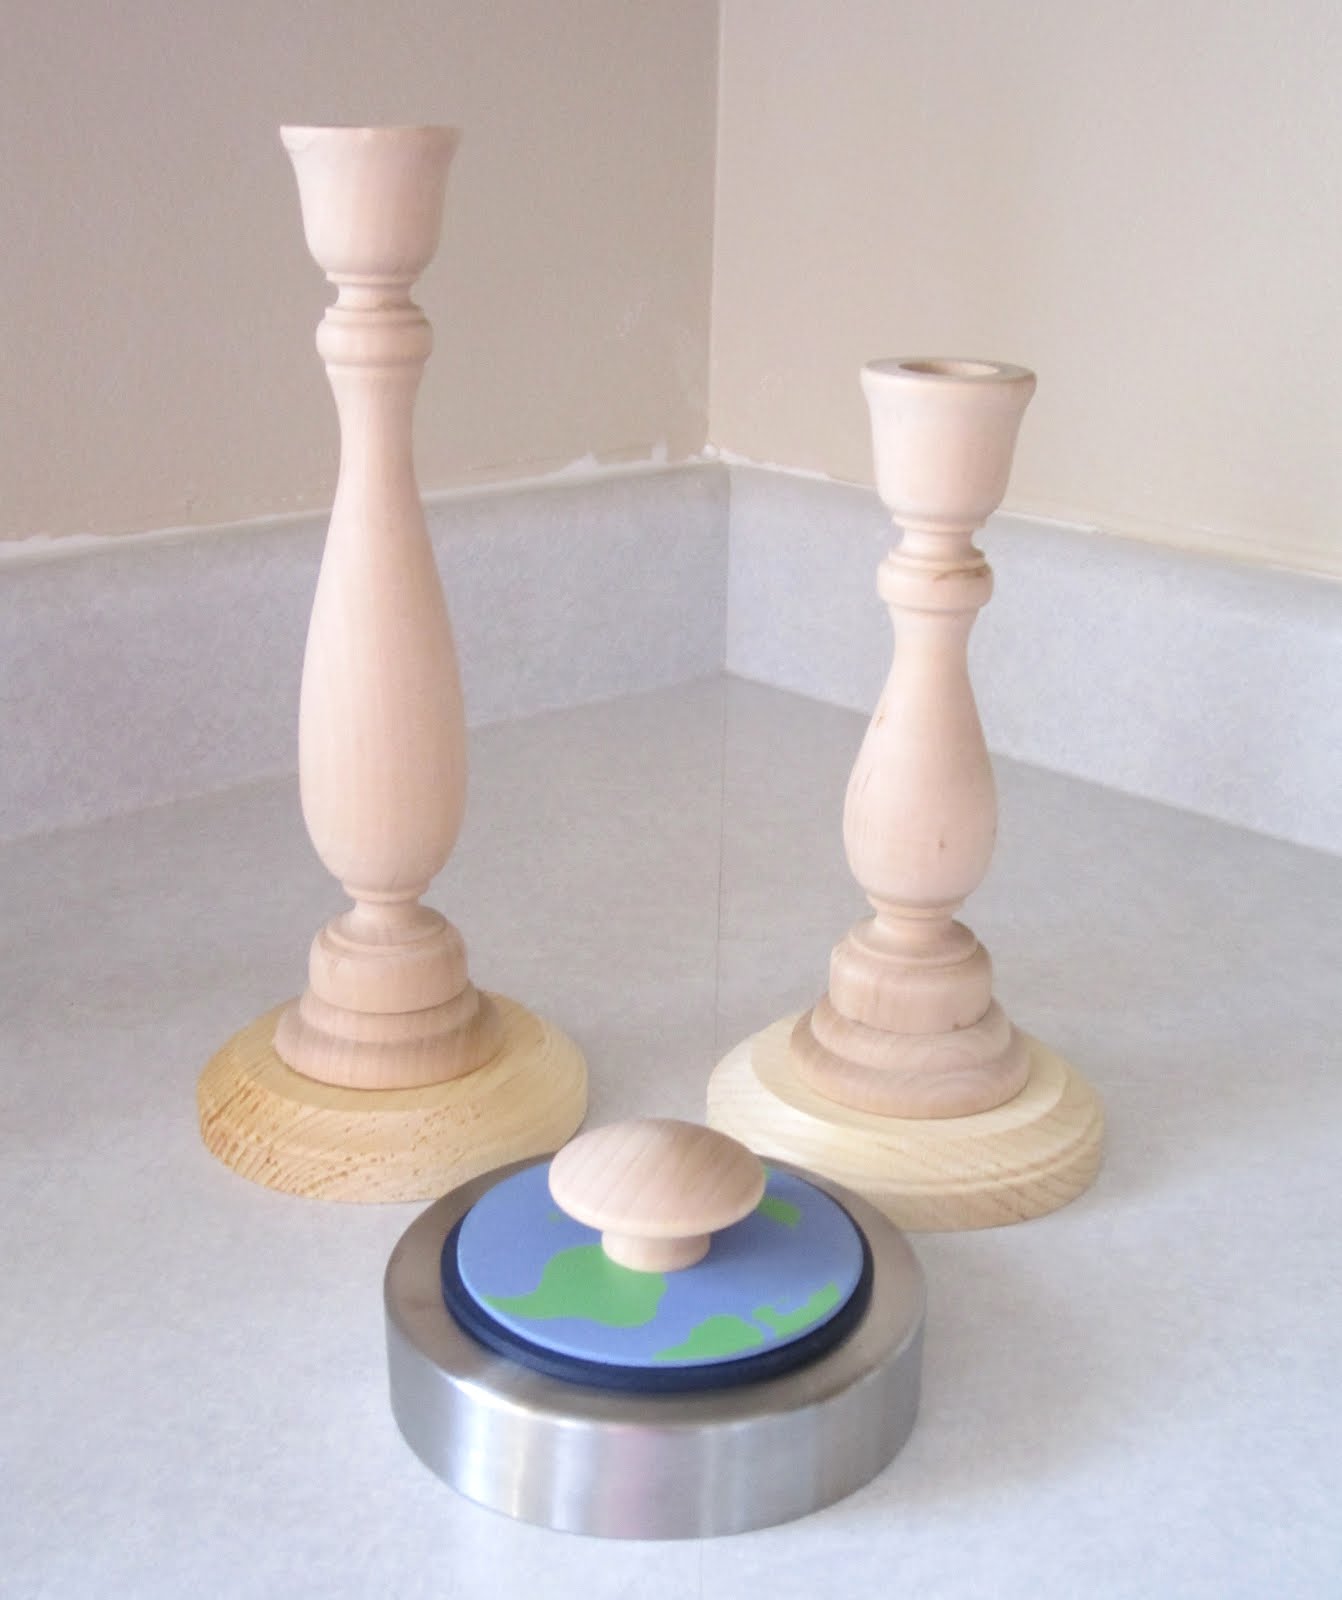 ... Glue your candlesticks to wood plaques, and wood knobs to lids